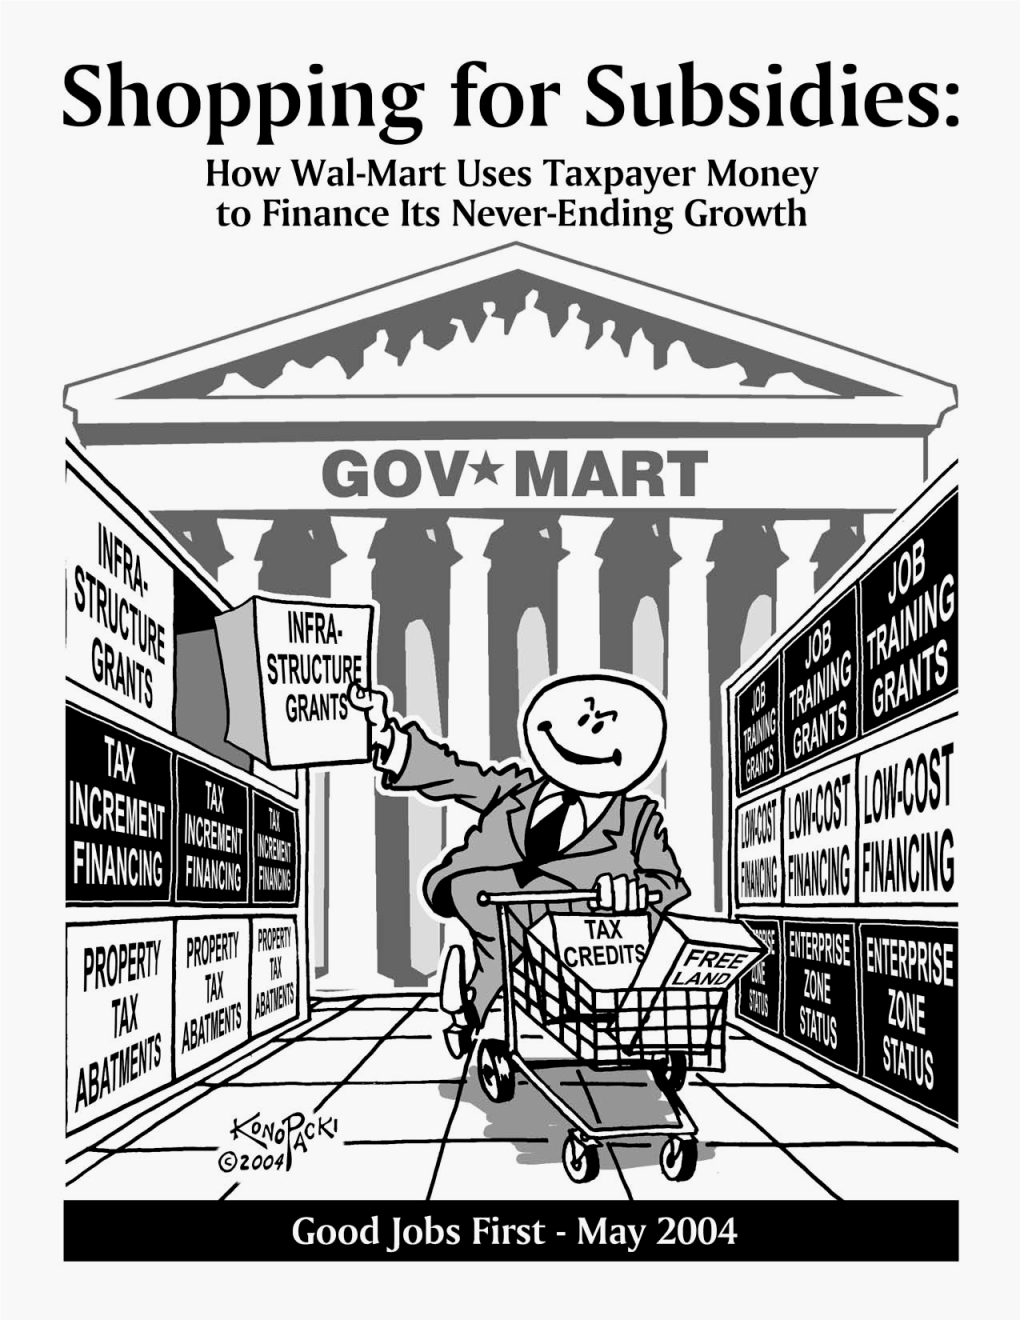 Shopping for Subsidies: How Wal-Mart Uses Taxpayer Money To